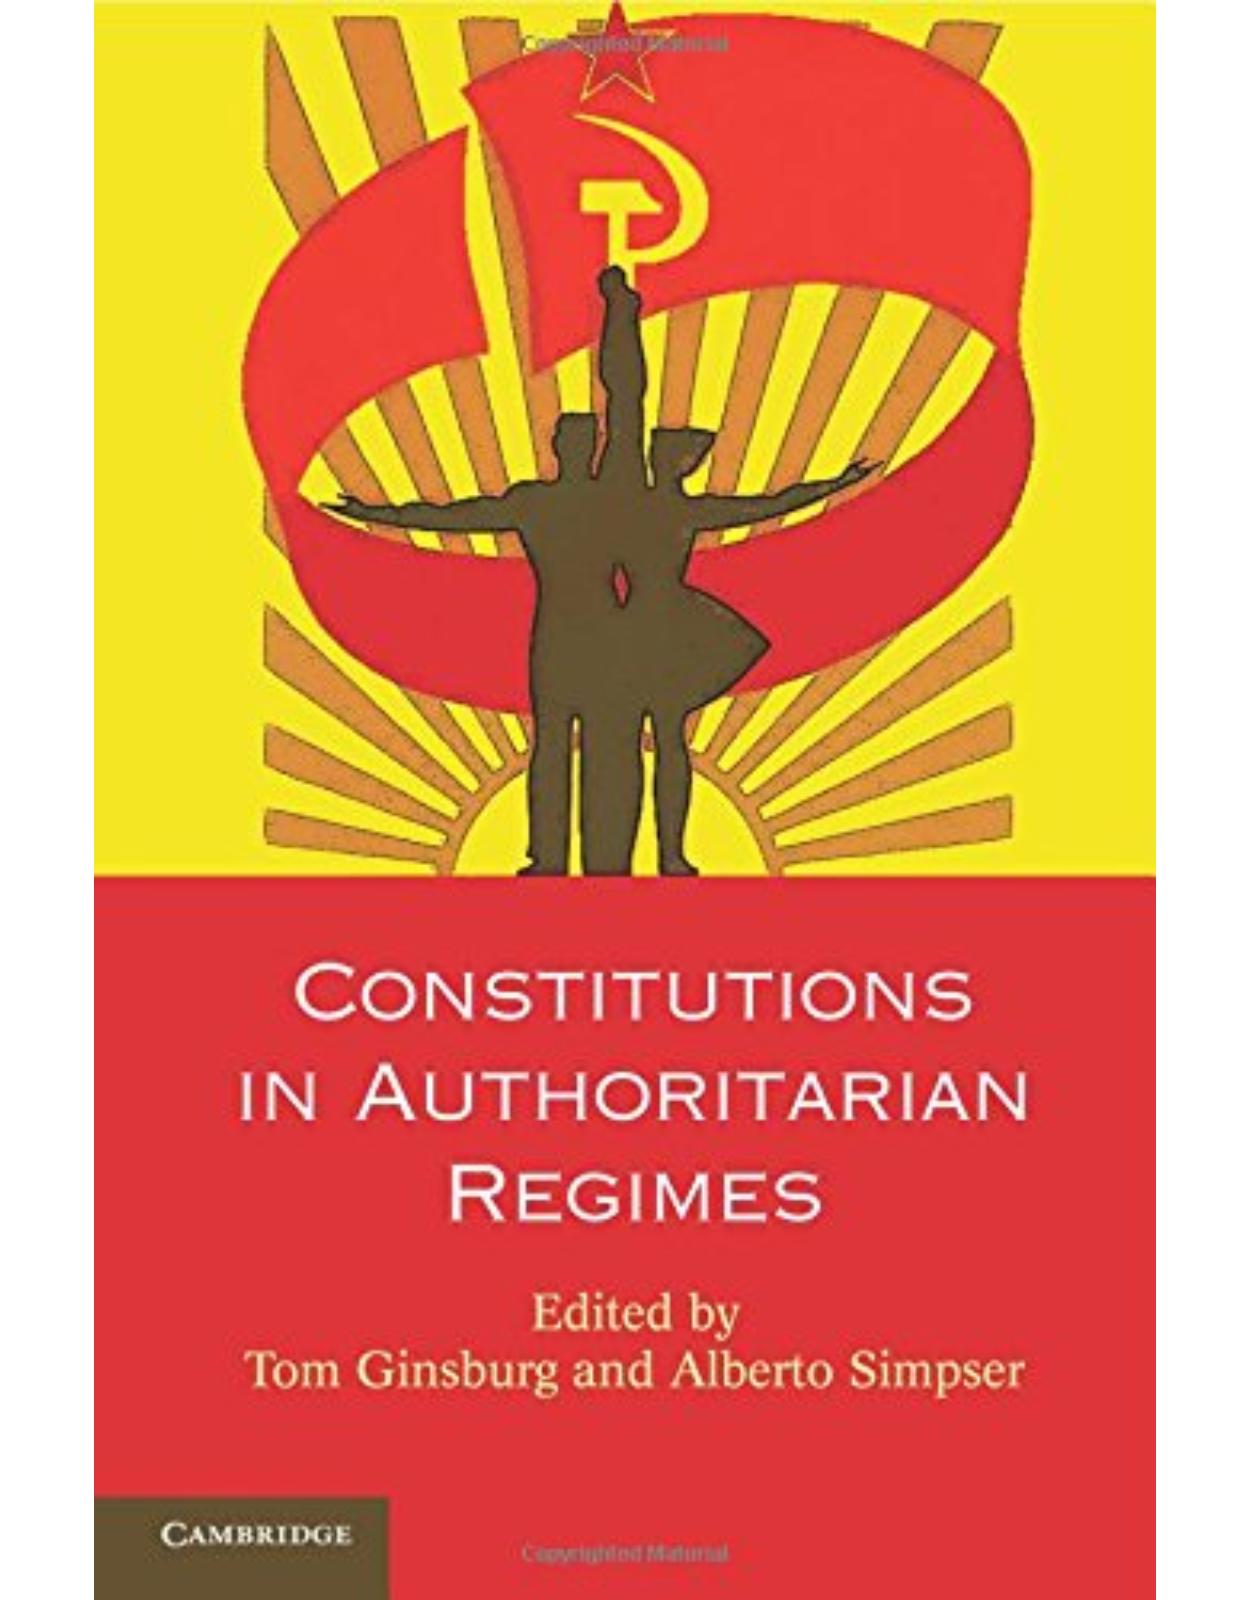 Constitutions in Authoritarian Regimes (Comparative Constitutional Law and Policy)